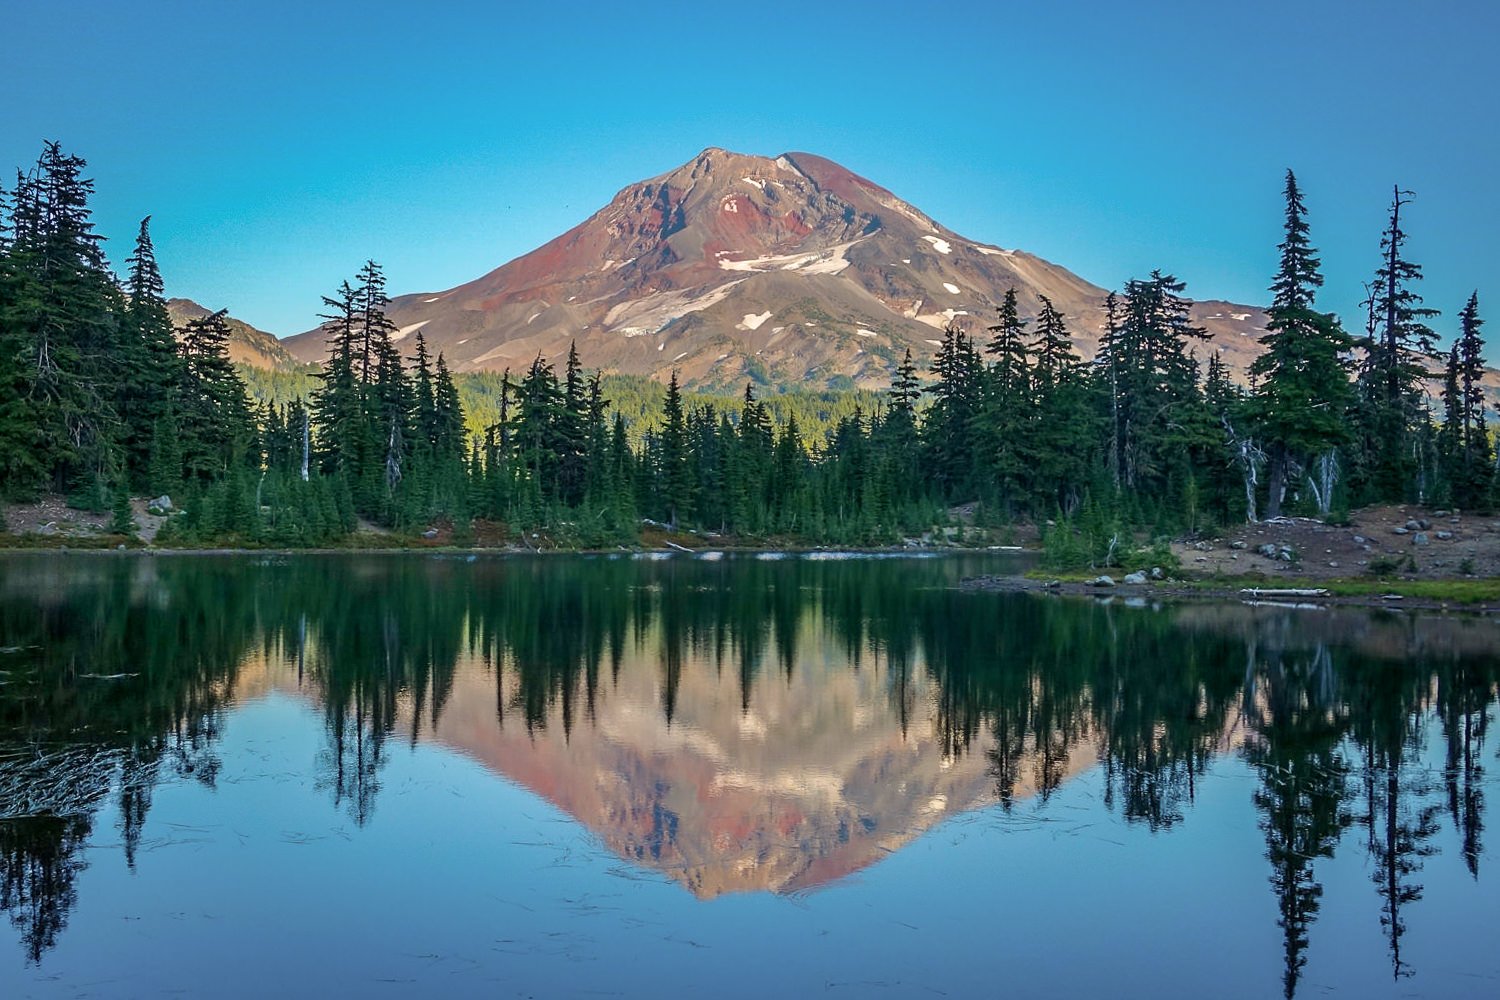 A view of South Sister from across a tree-lined lake.